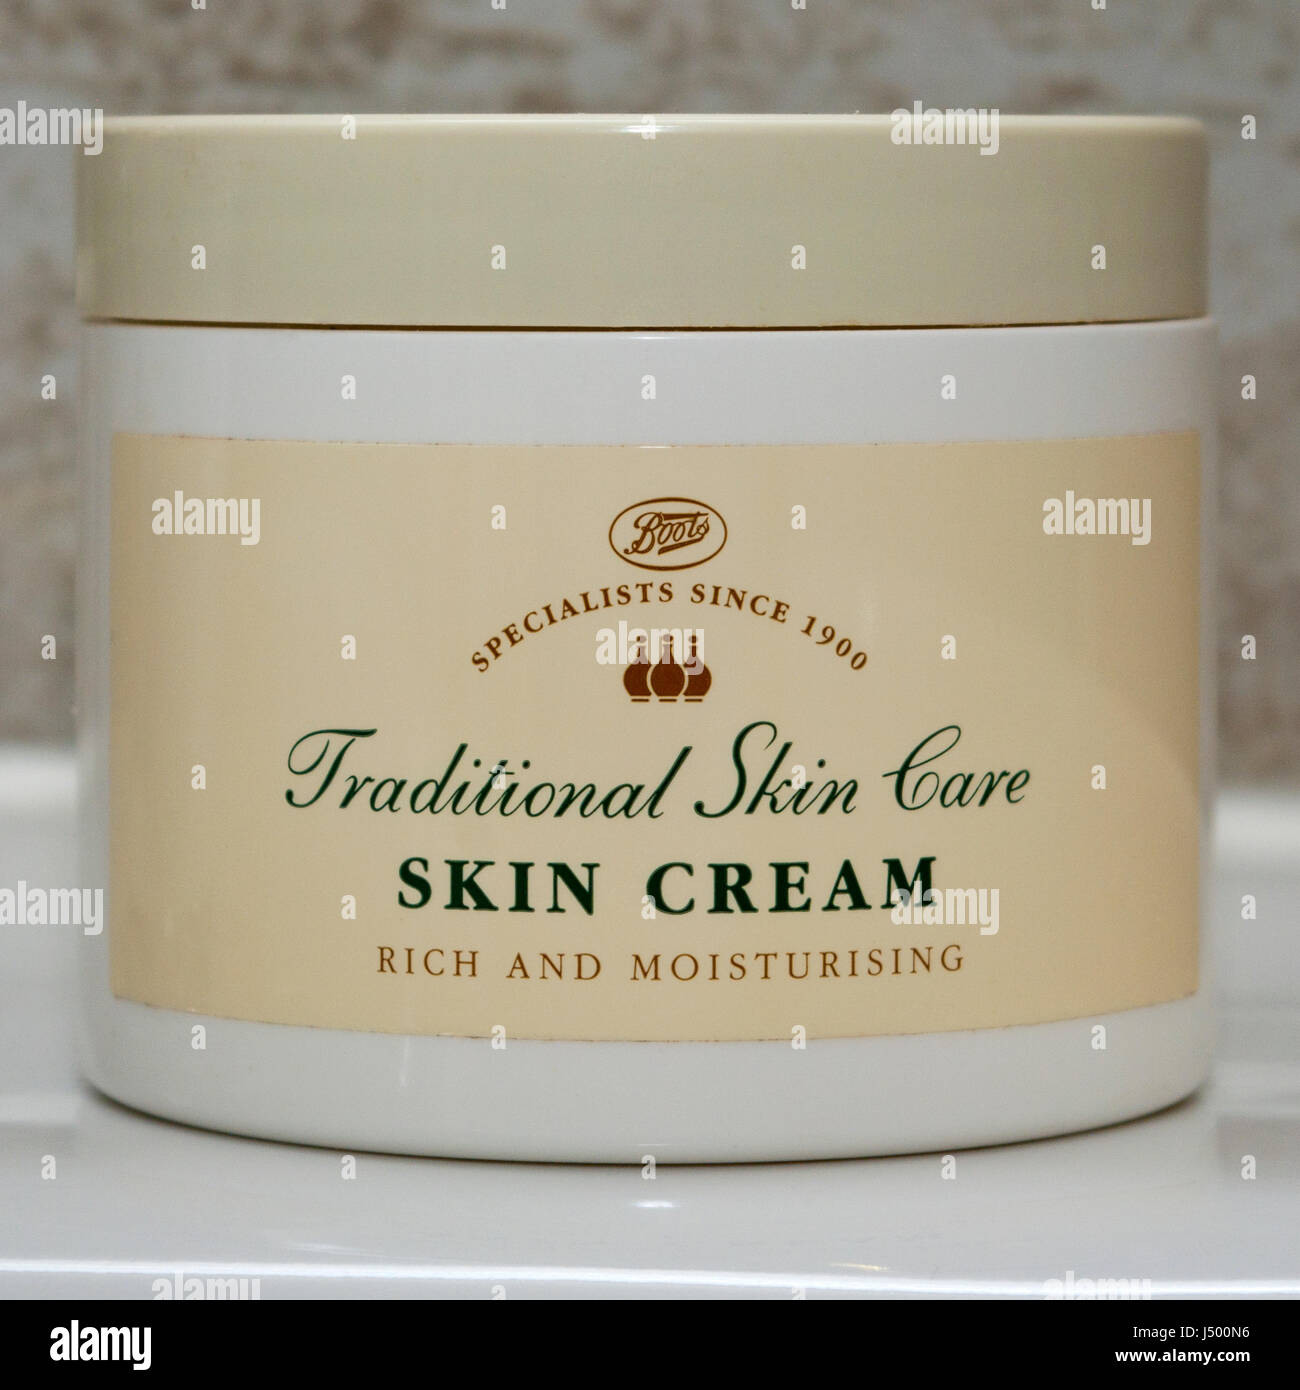 Tub Of Boots Traditional Skin Care Boots Own Brand Rich and Moisturing Skin Cream Stock Photo